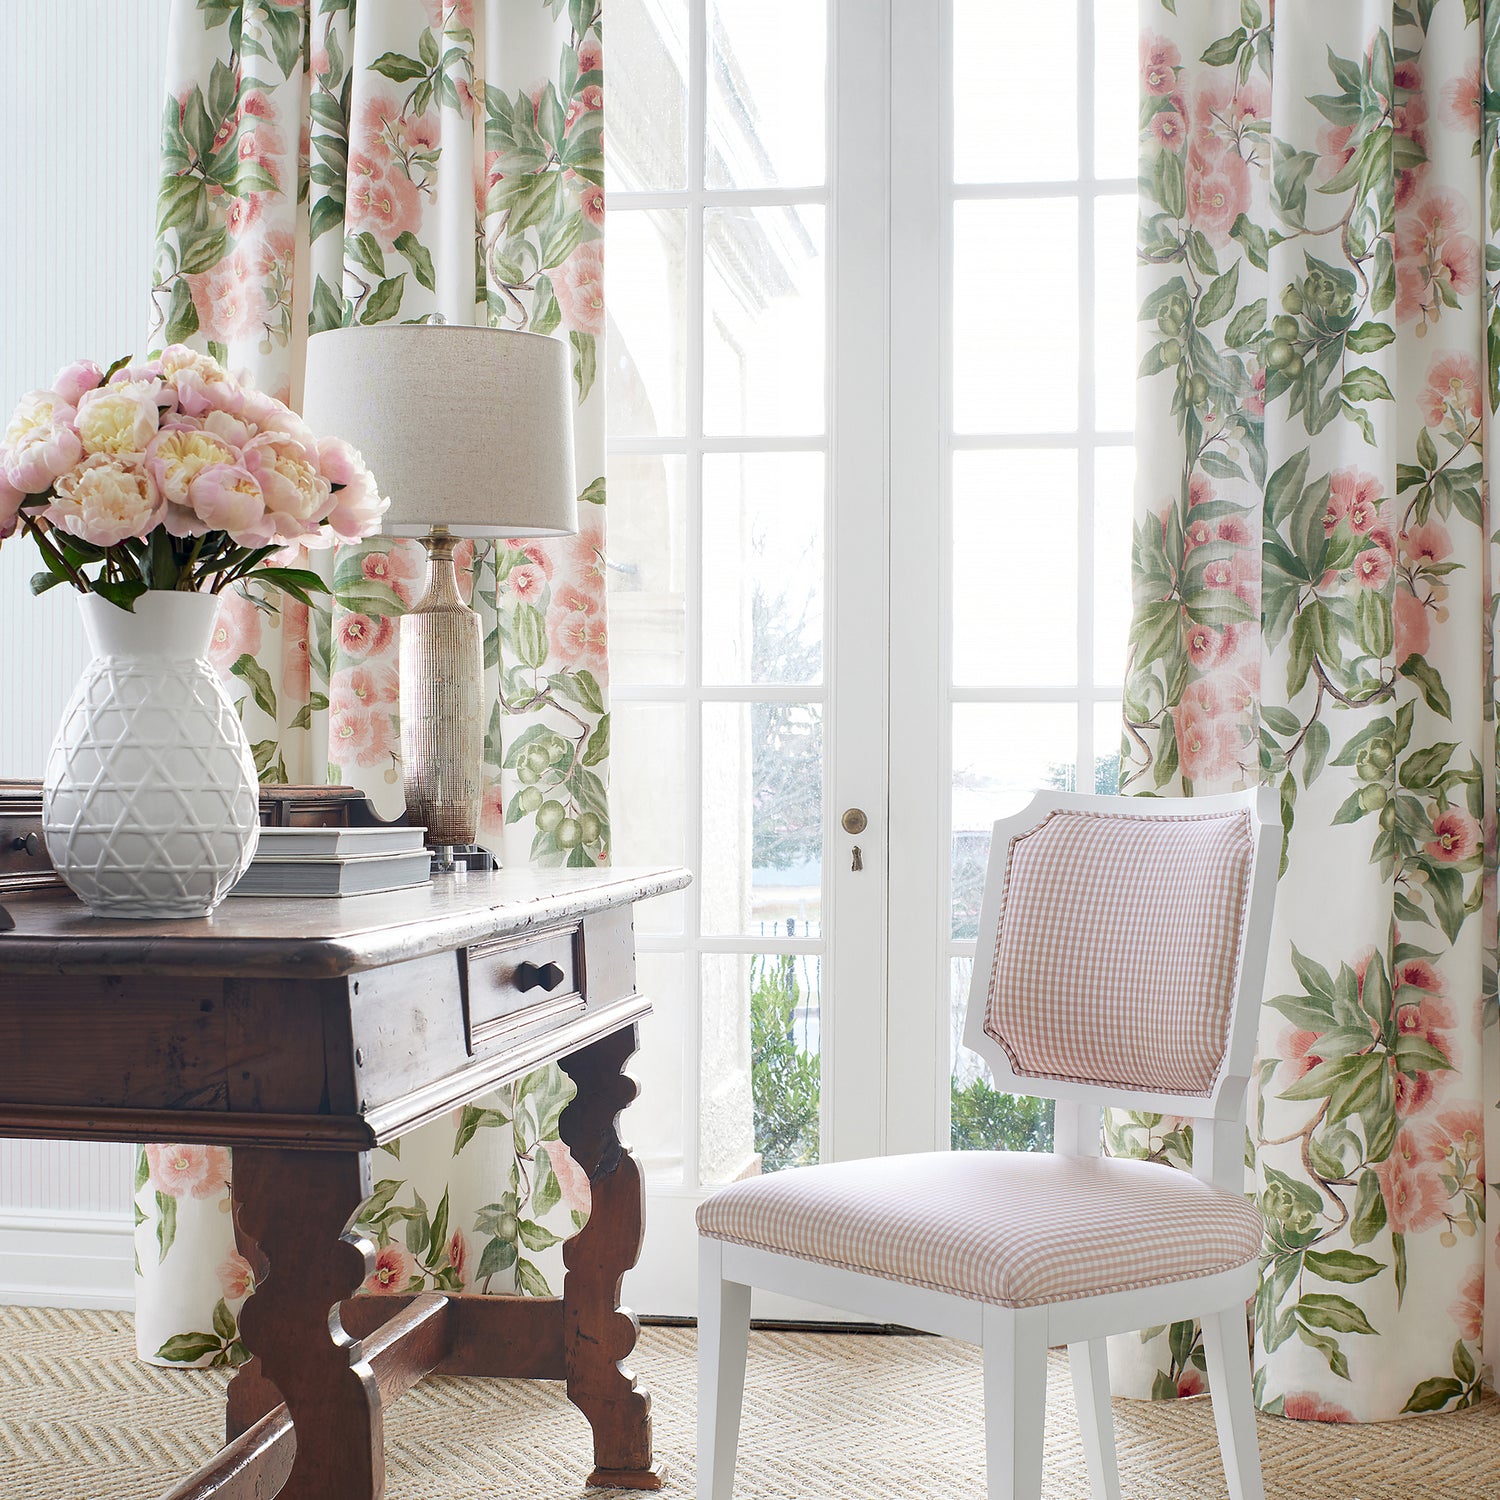 Curtains in Camellia Garden printed fabric in Coral by Anna French, pattern number AF24550